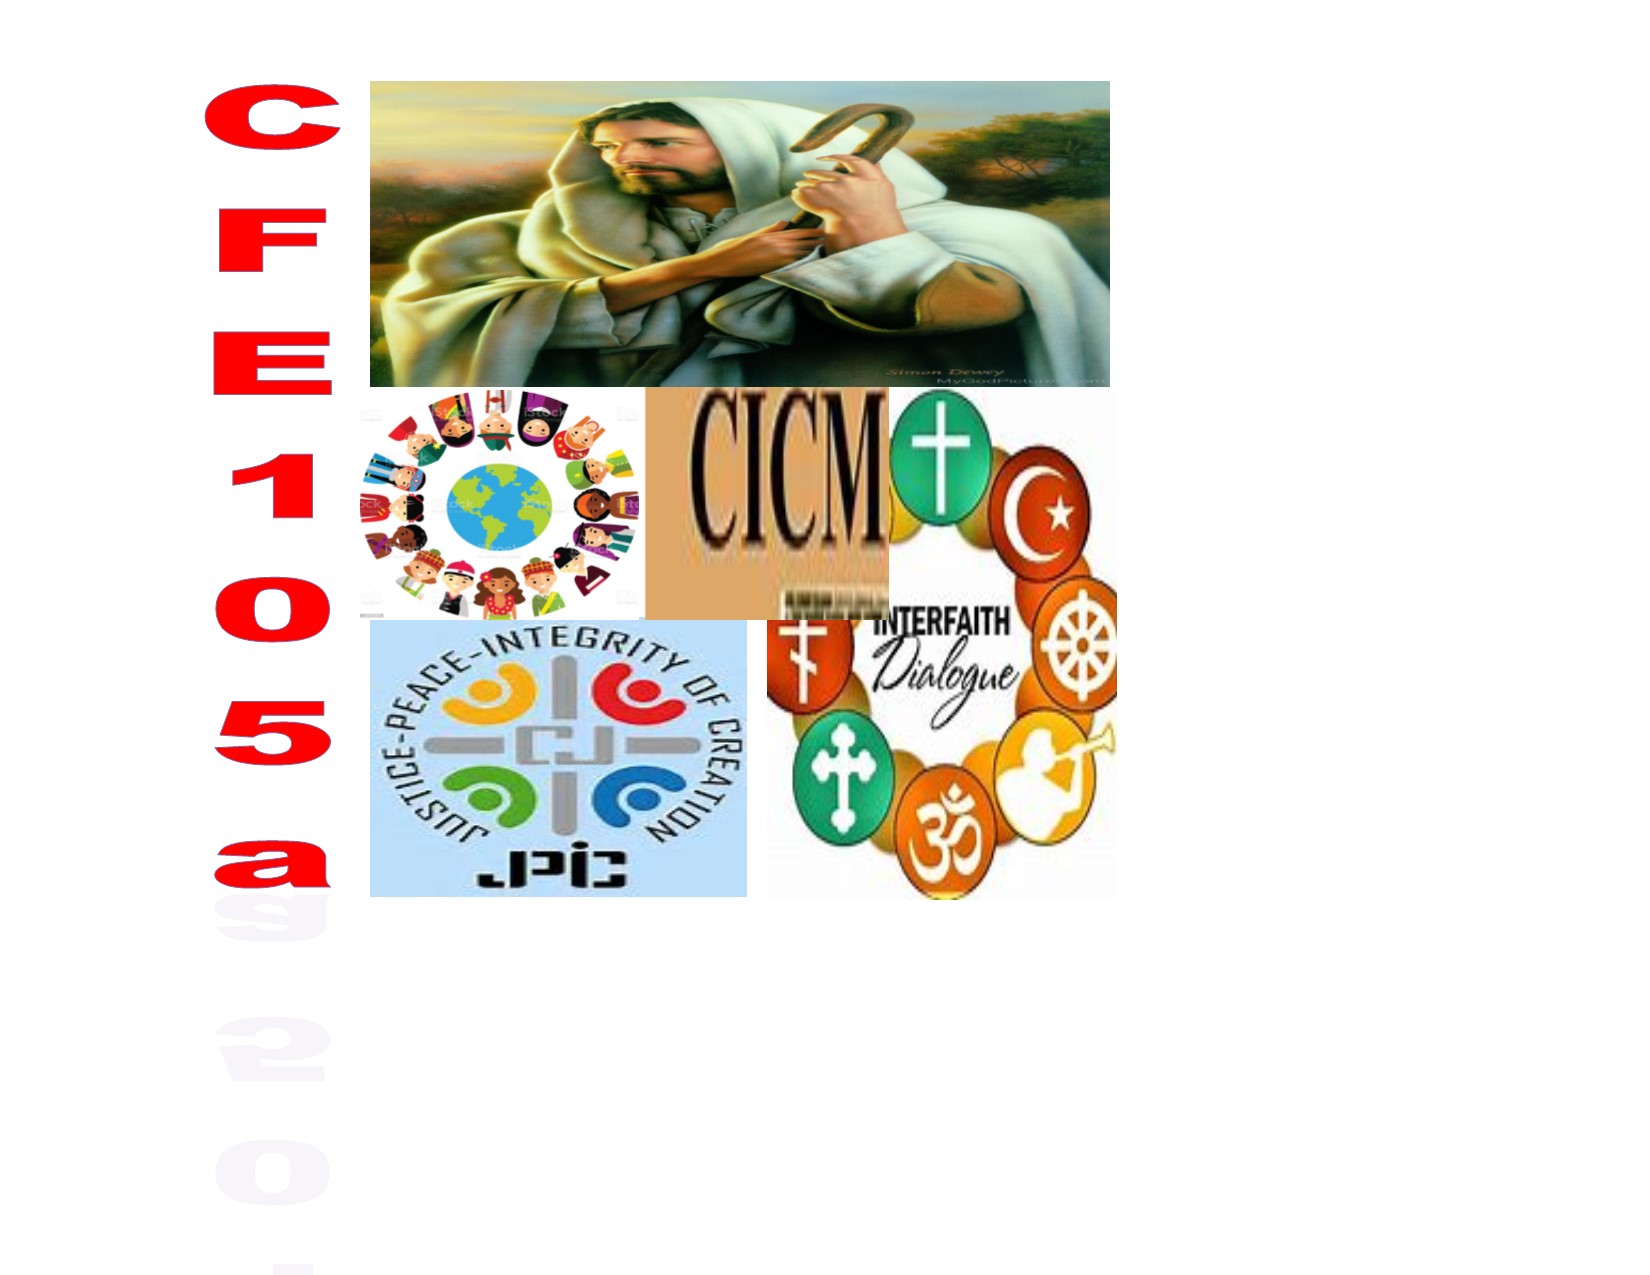 CFE 105a [3101] CICM in Action: Justice, Peace and Integrity of Creation; Indigenous Peoples; Interreligious Dialogu